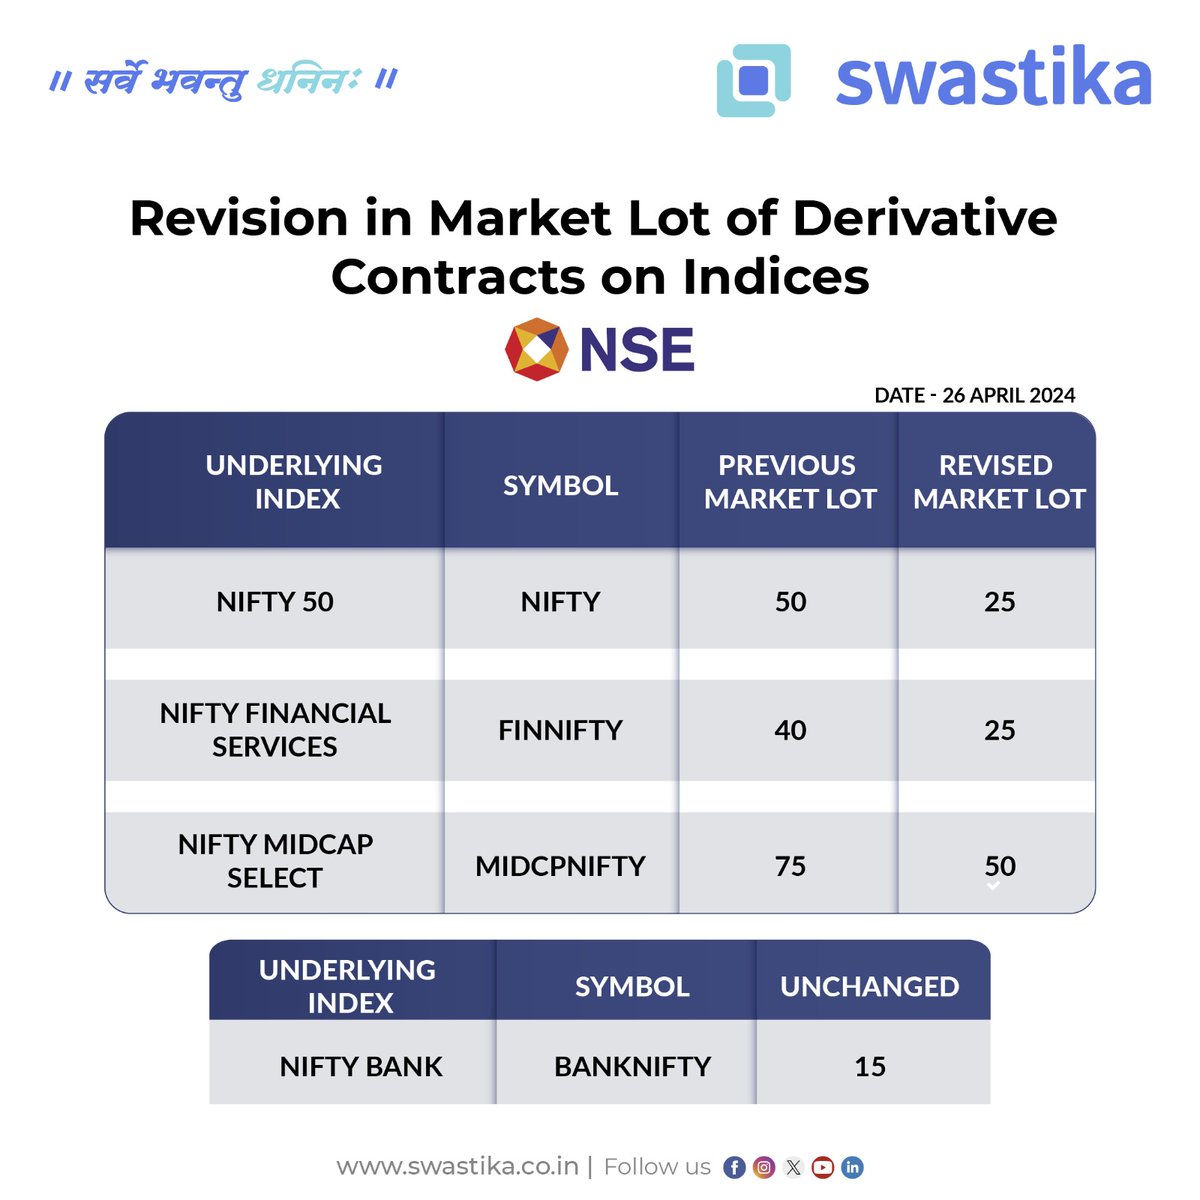 📈 NSE revises market lot sizes for indices like Nifty 50, Nifty Financial Services, and Nifty Midcap.
.
.
.
#SwastikaInvestmart #nse #niftyfifty #nifty #niftytrading #niftymidcap #trading #sharemarket 

@NSEIndia